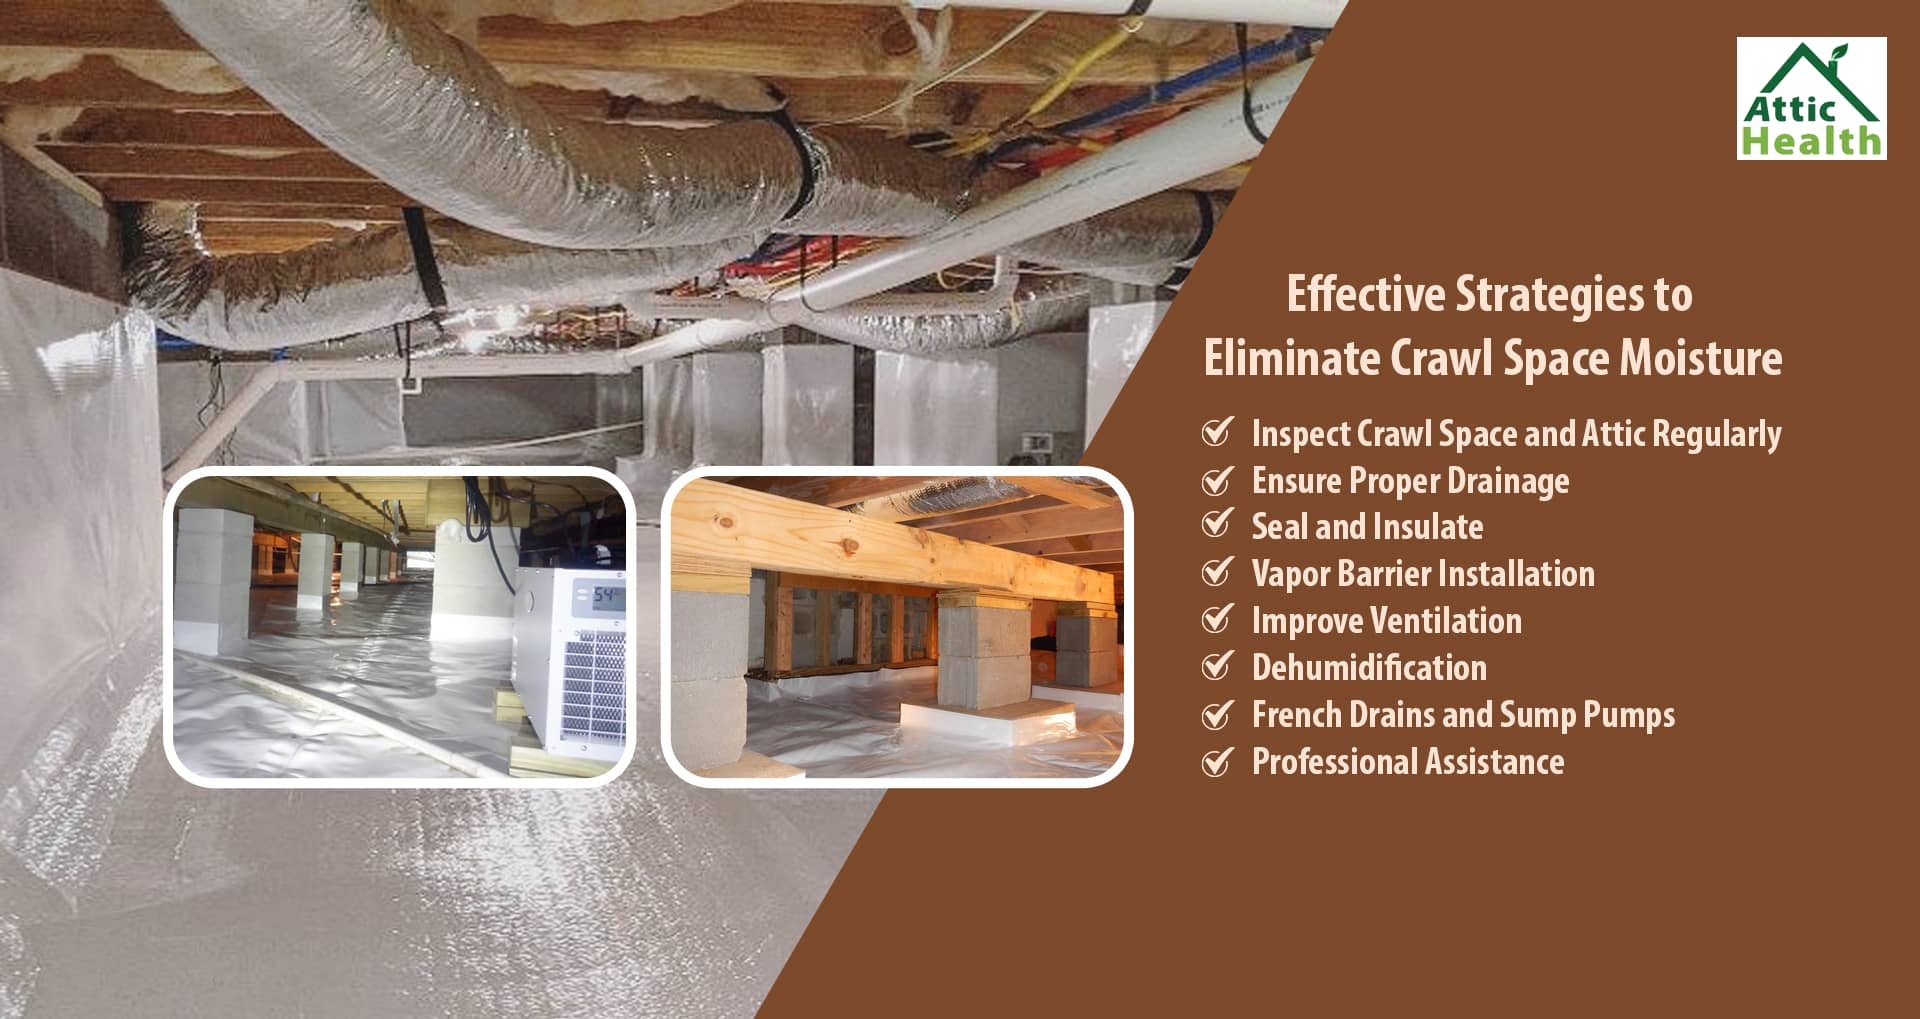 8 Strategies for crawl space moisture removal process. See professionals vapor barriers, duct hanging, and other professional crawl space work in this multi-photo image. 